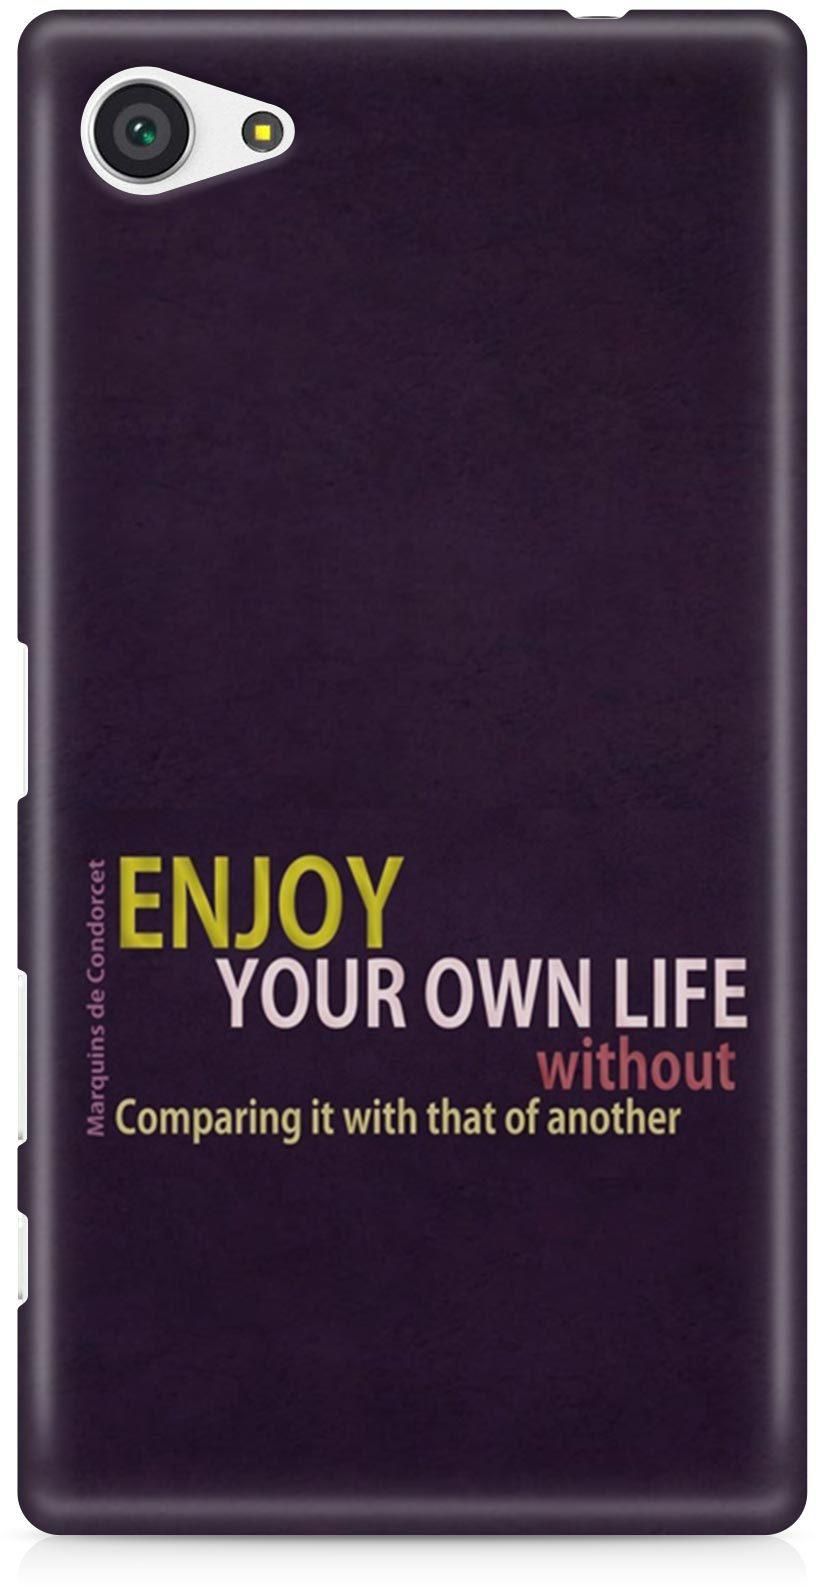 Enjoy Your Own Life Phone Case Cover Inspirational for Sony Z5 Mini